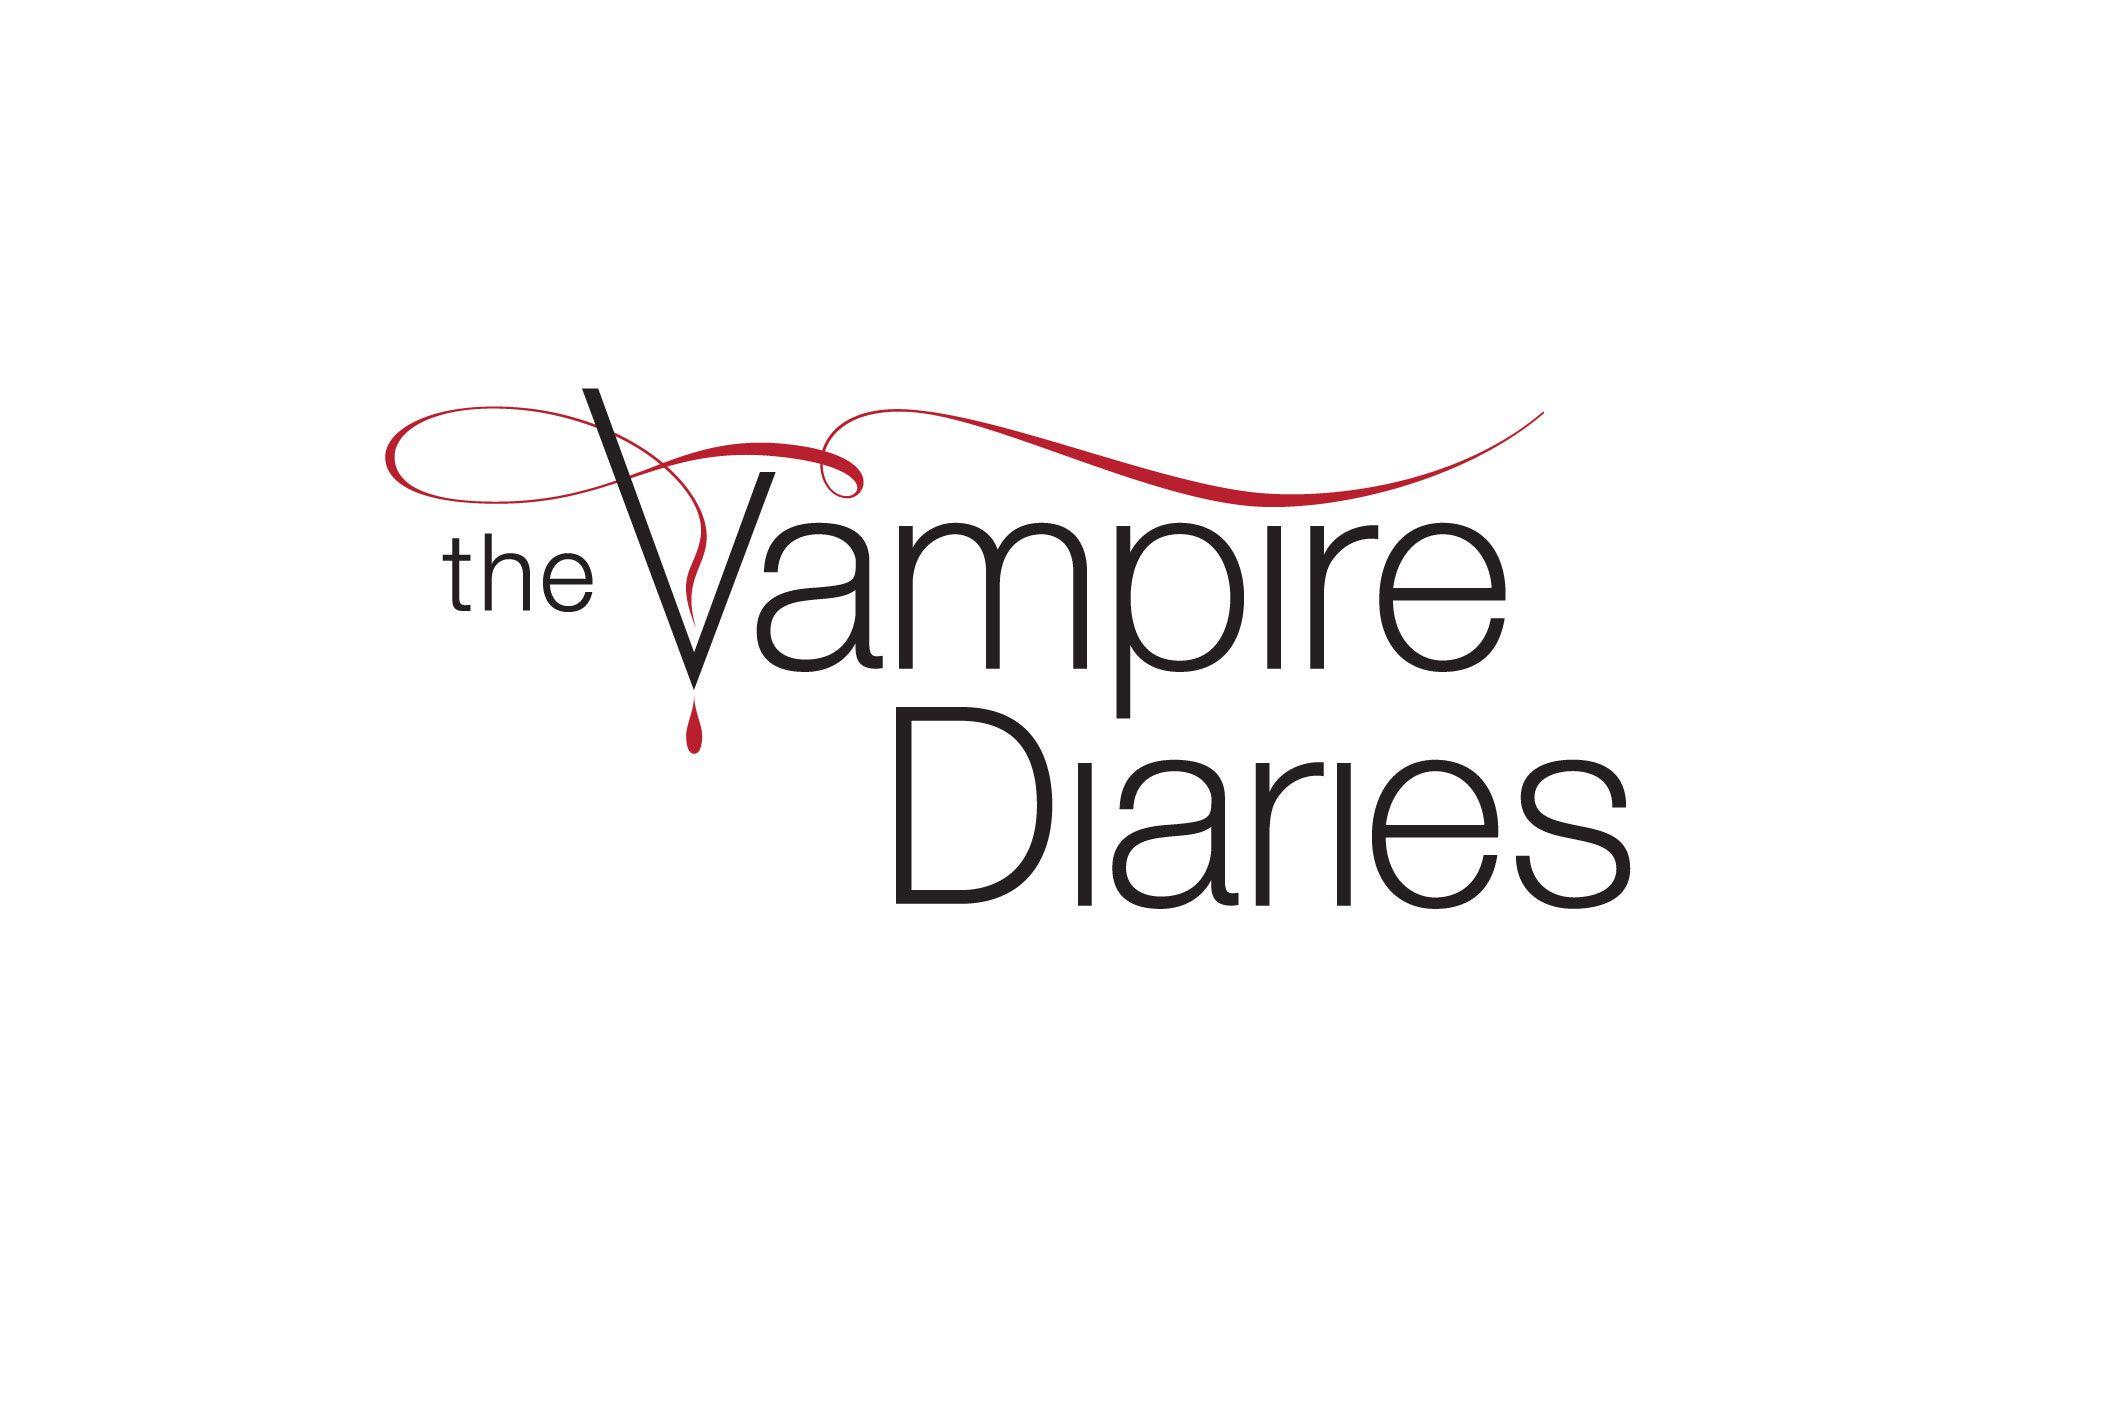 The Vampire Diaries Logo - The Vampire Diaries | by Chase Design Group | The vampire diaries ^_ ...